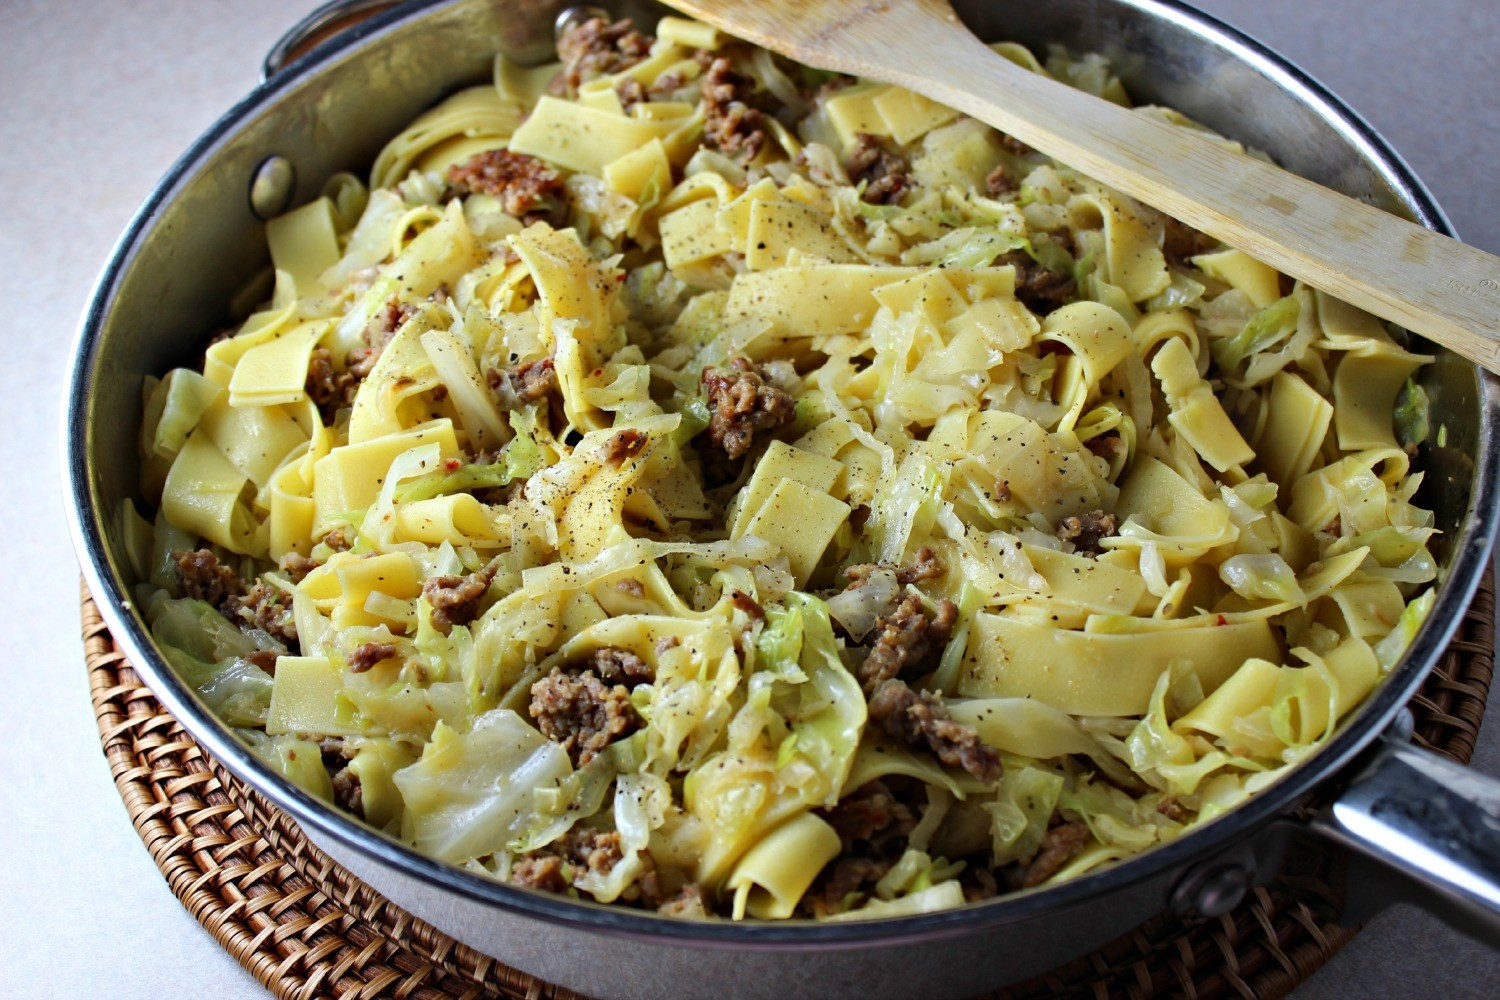 Healthy Main Dishes
 10 Ways to Turn Cabbage Into Quick Healthy Main Dishes